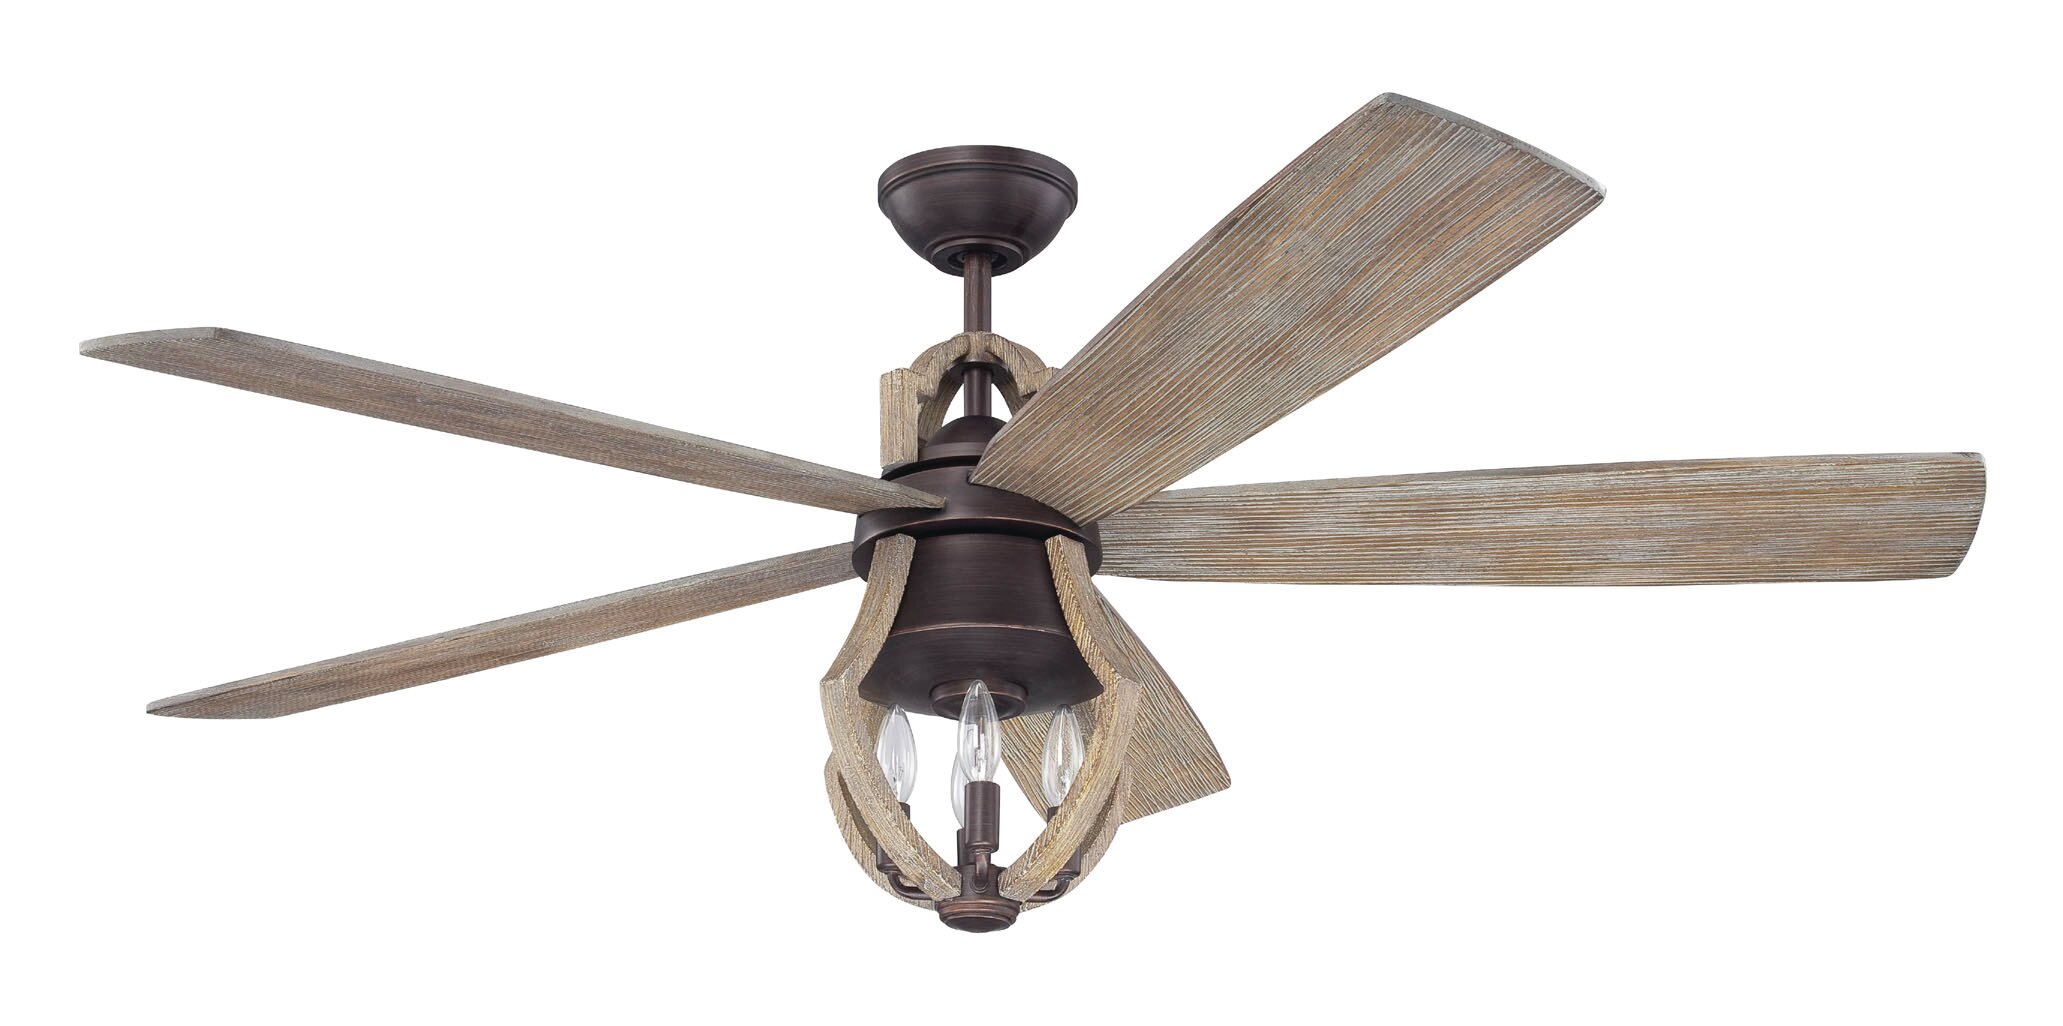 Birch Lane 56 Fortunato 5 Blade Standard Ceiling Fan With Wall Control And Light Kit Included Reviews Wayfair